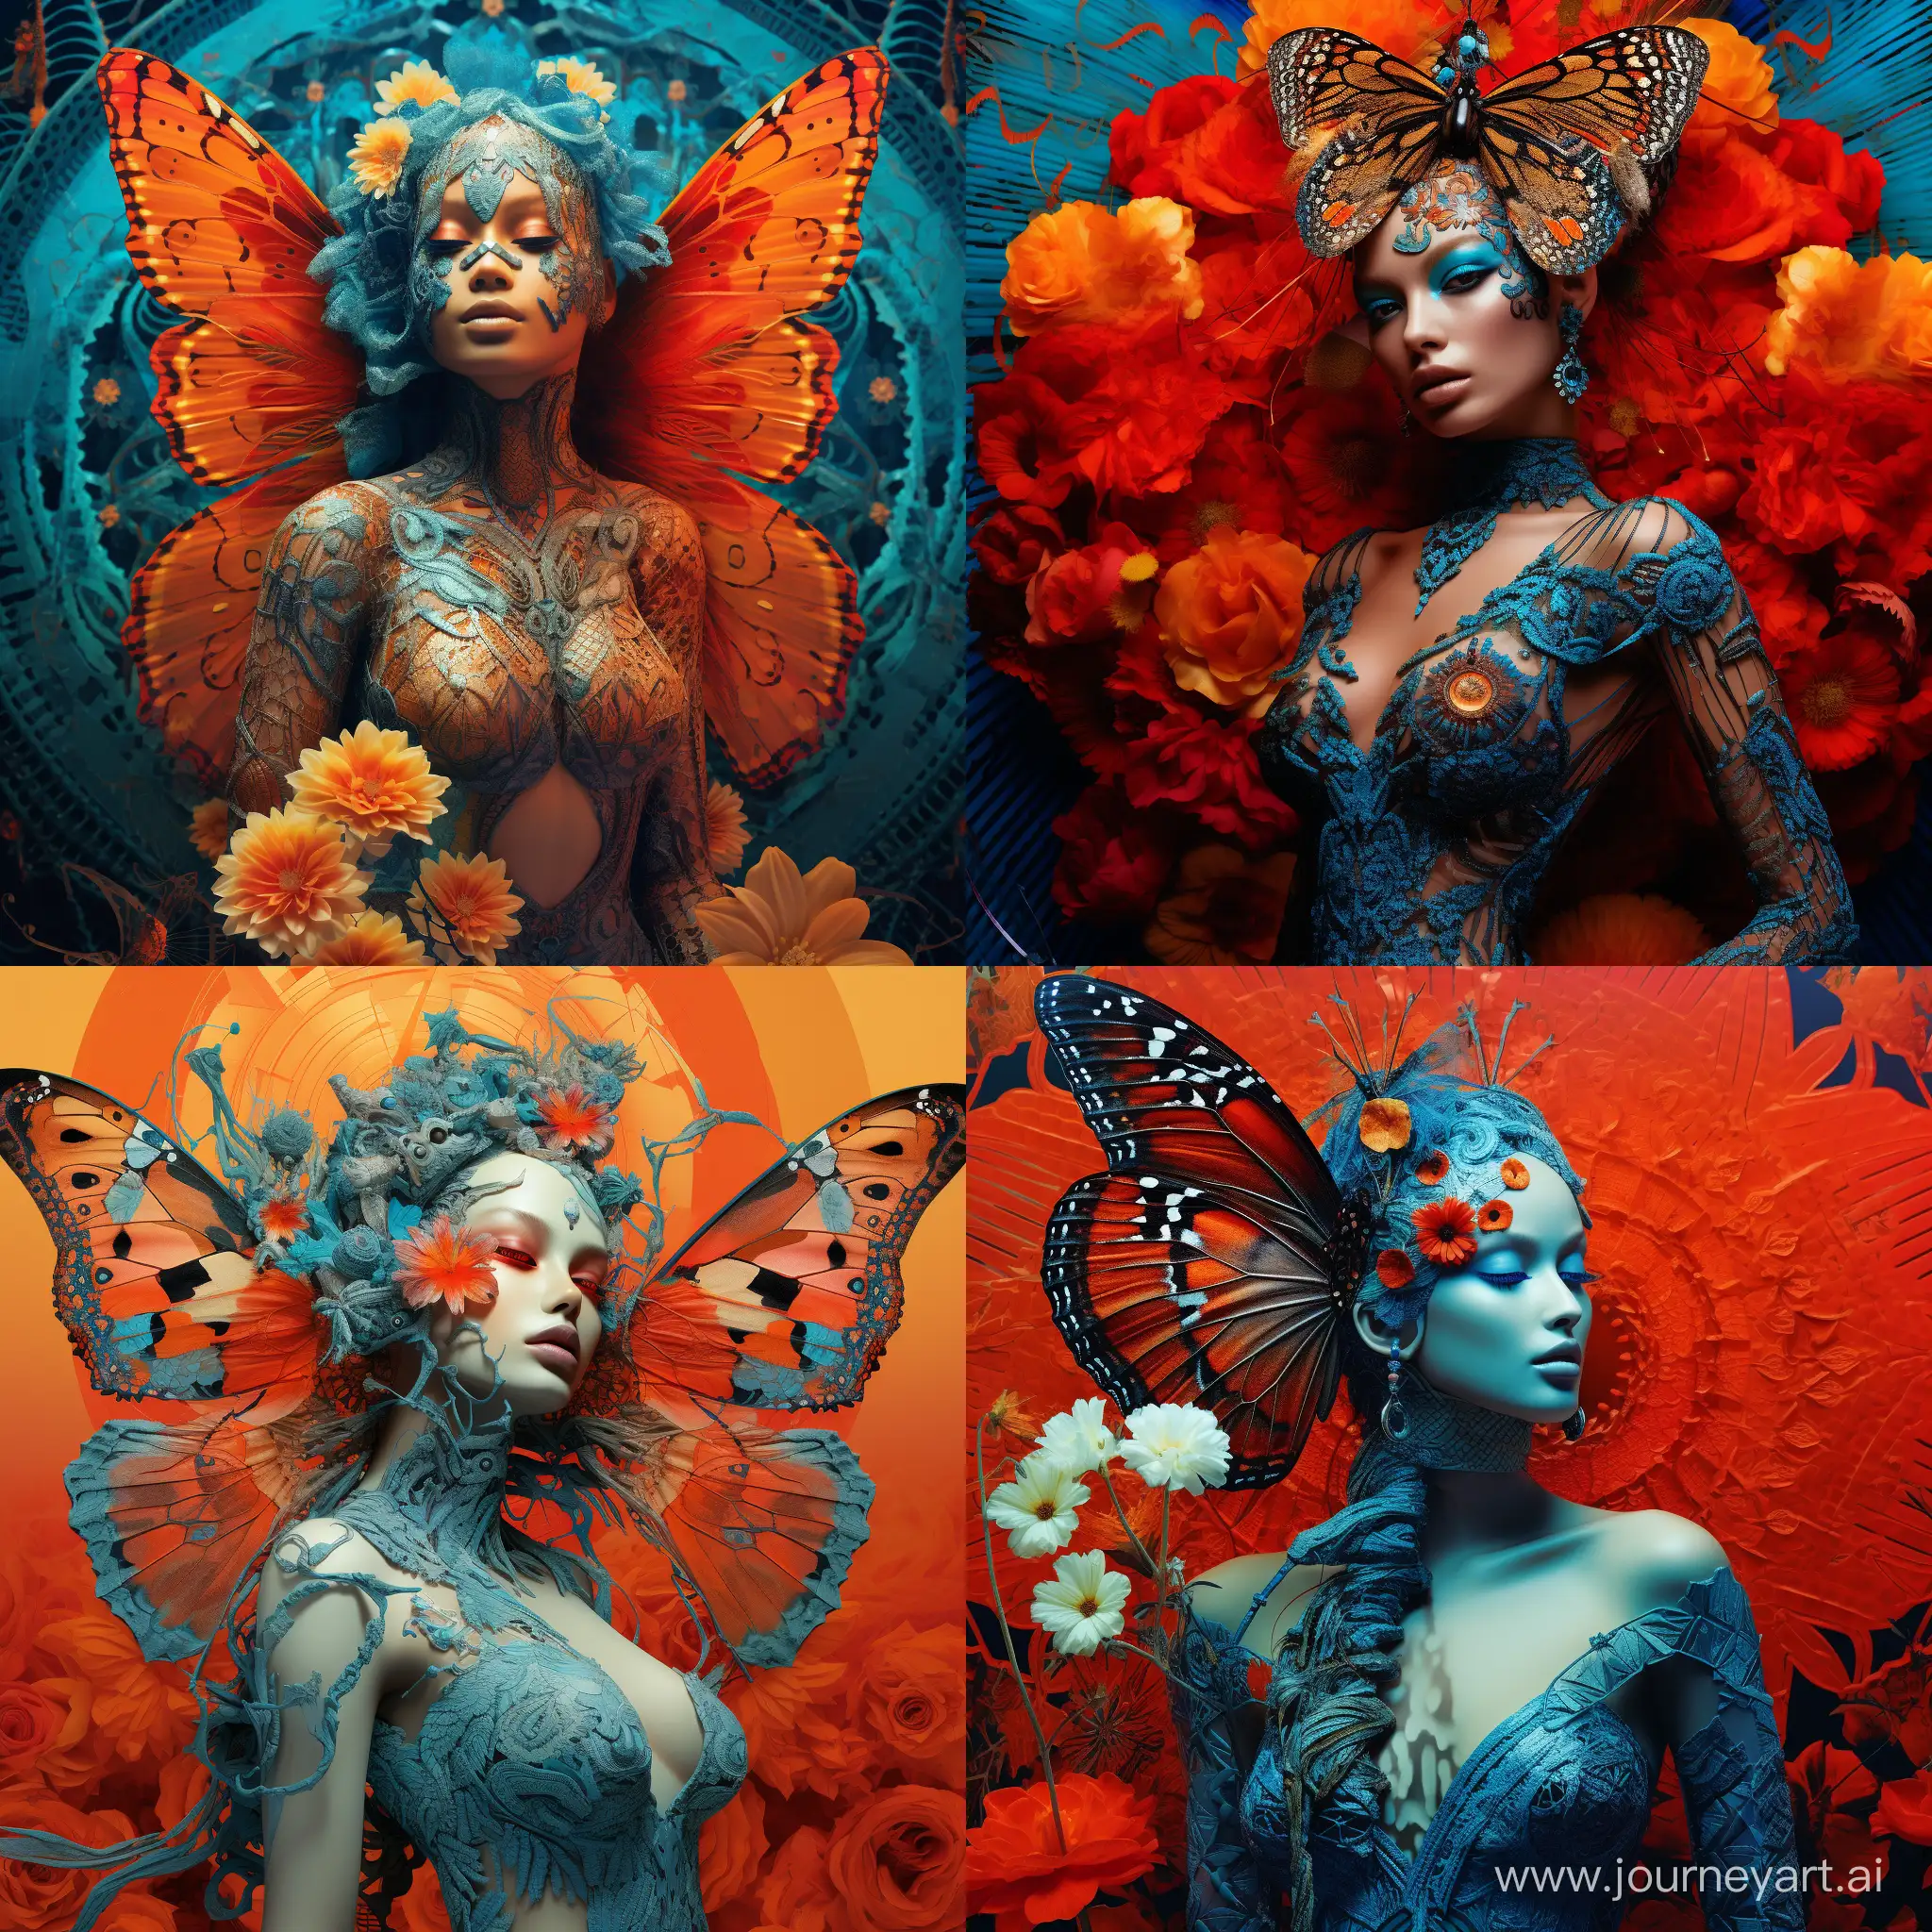 Anaglyphic, Fibonacci sequence and beauty, feminine. A beautiful butterfly lady made from intricate lace patterns sitting on a bright orange flower, surreal, dynamic composition, rich textures, blue, orange, red, turquoise